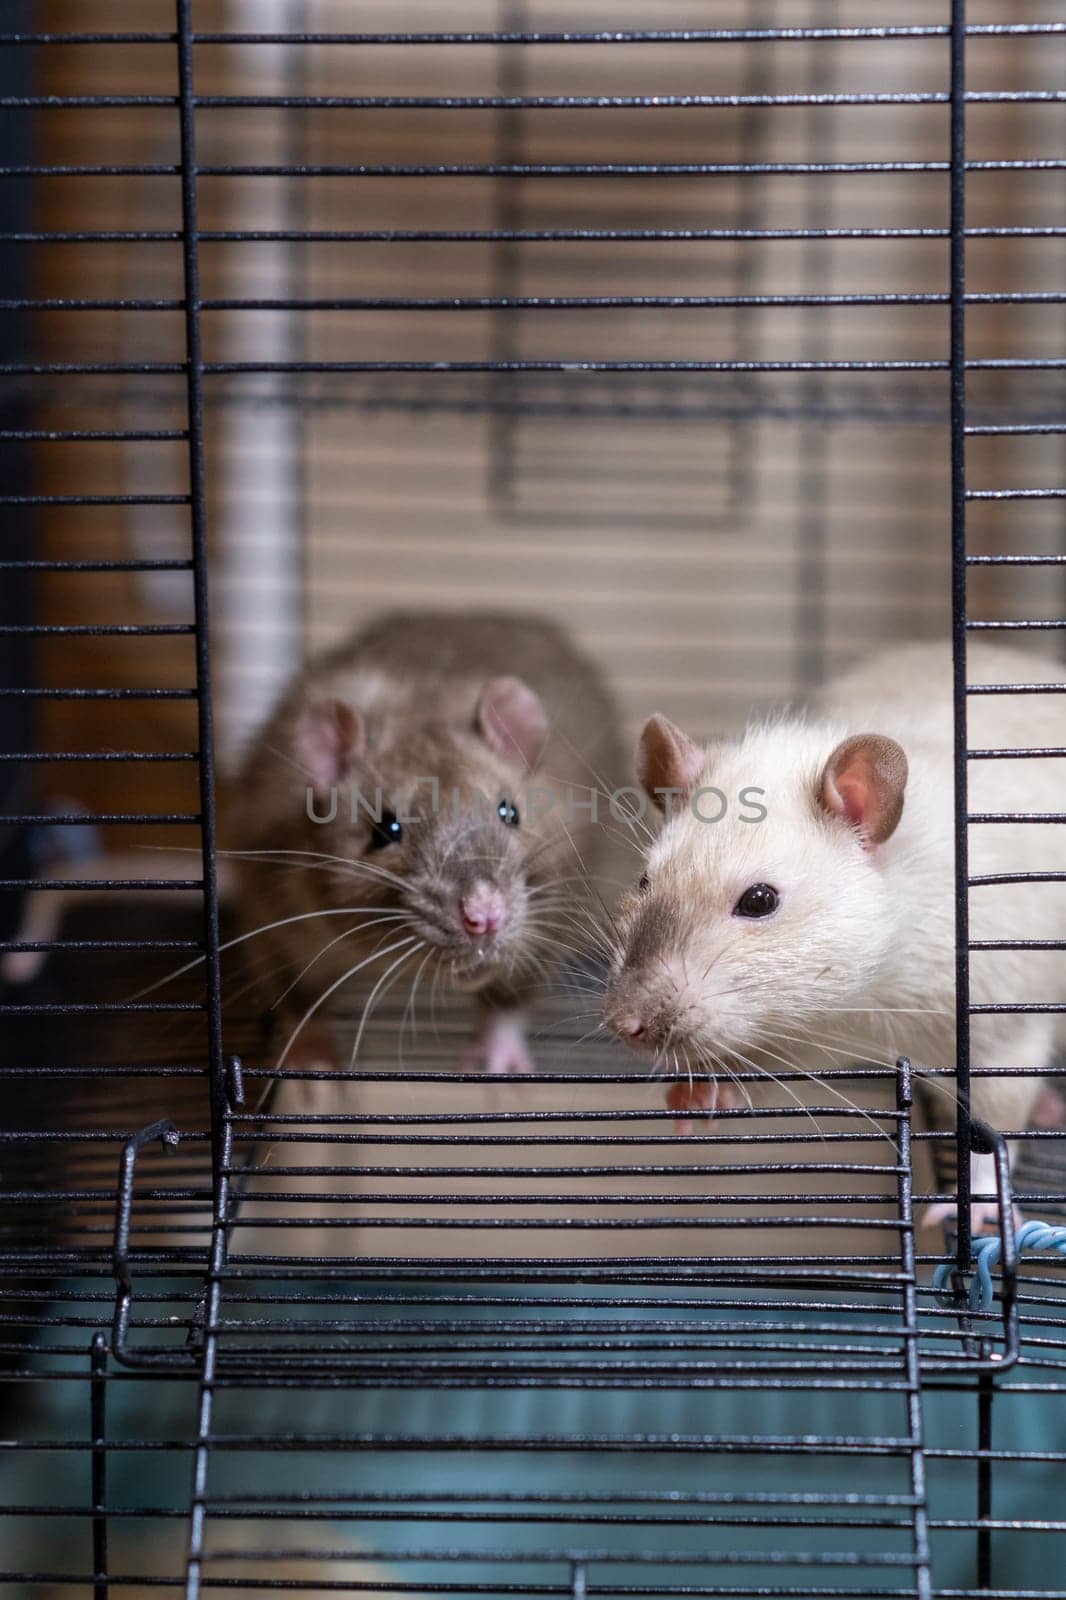 Domestic rat in a cage holds food with its paws and eats. A rodent with whiskers, a tail, and whitefooted mice is sitting in a cage, gazing out the window. It may be a pet or a pest like packrats